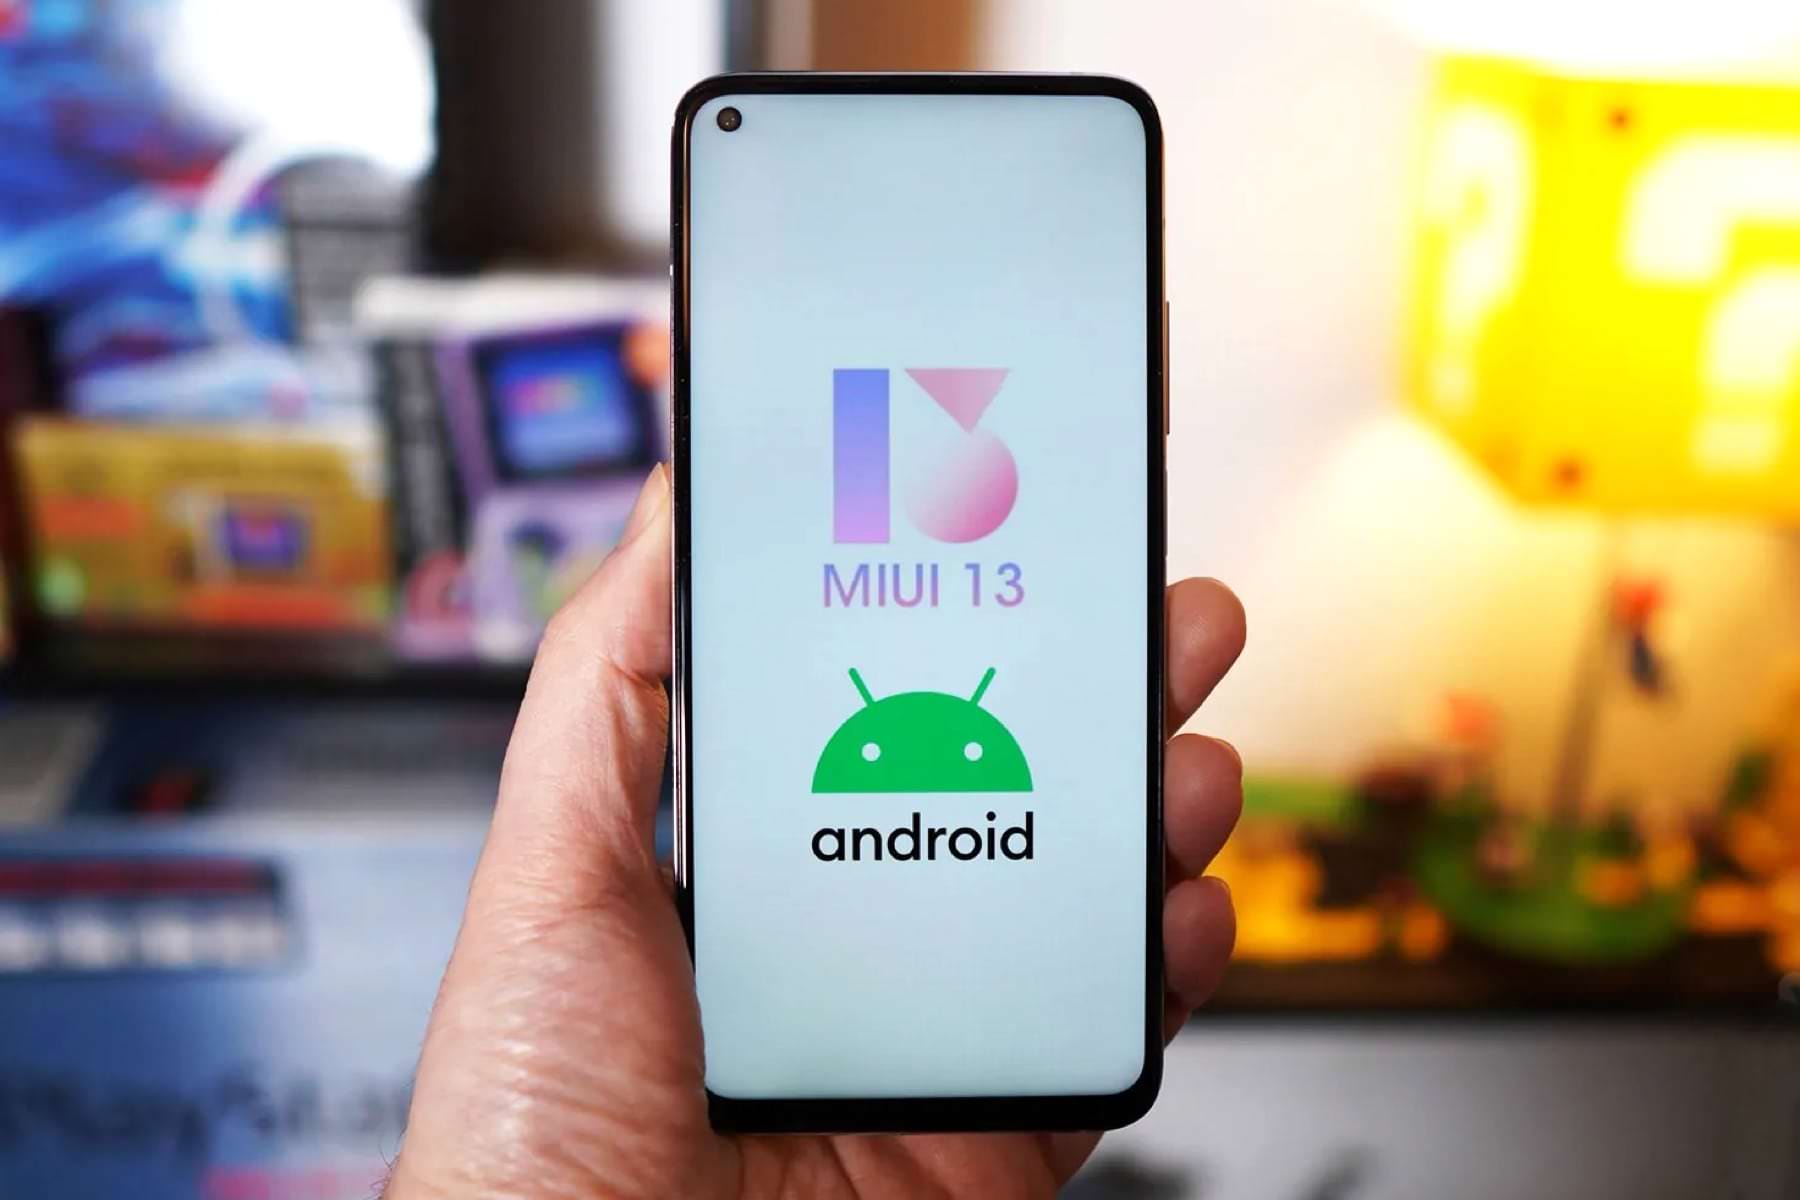 102 Xiaomi smartphones will receive Android 12 operating system with MIUI 13 - updated list published